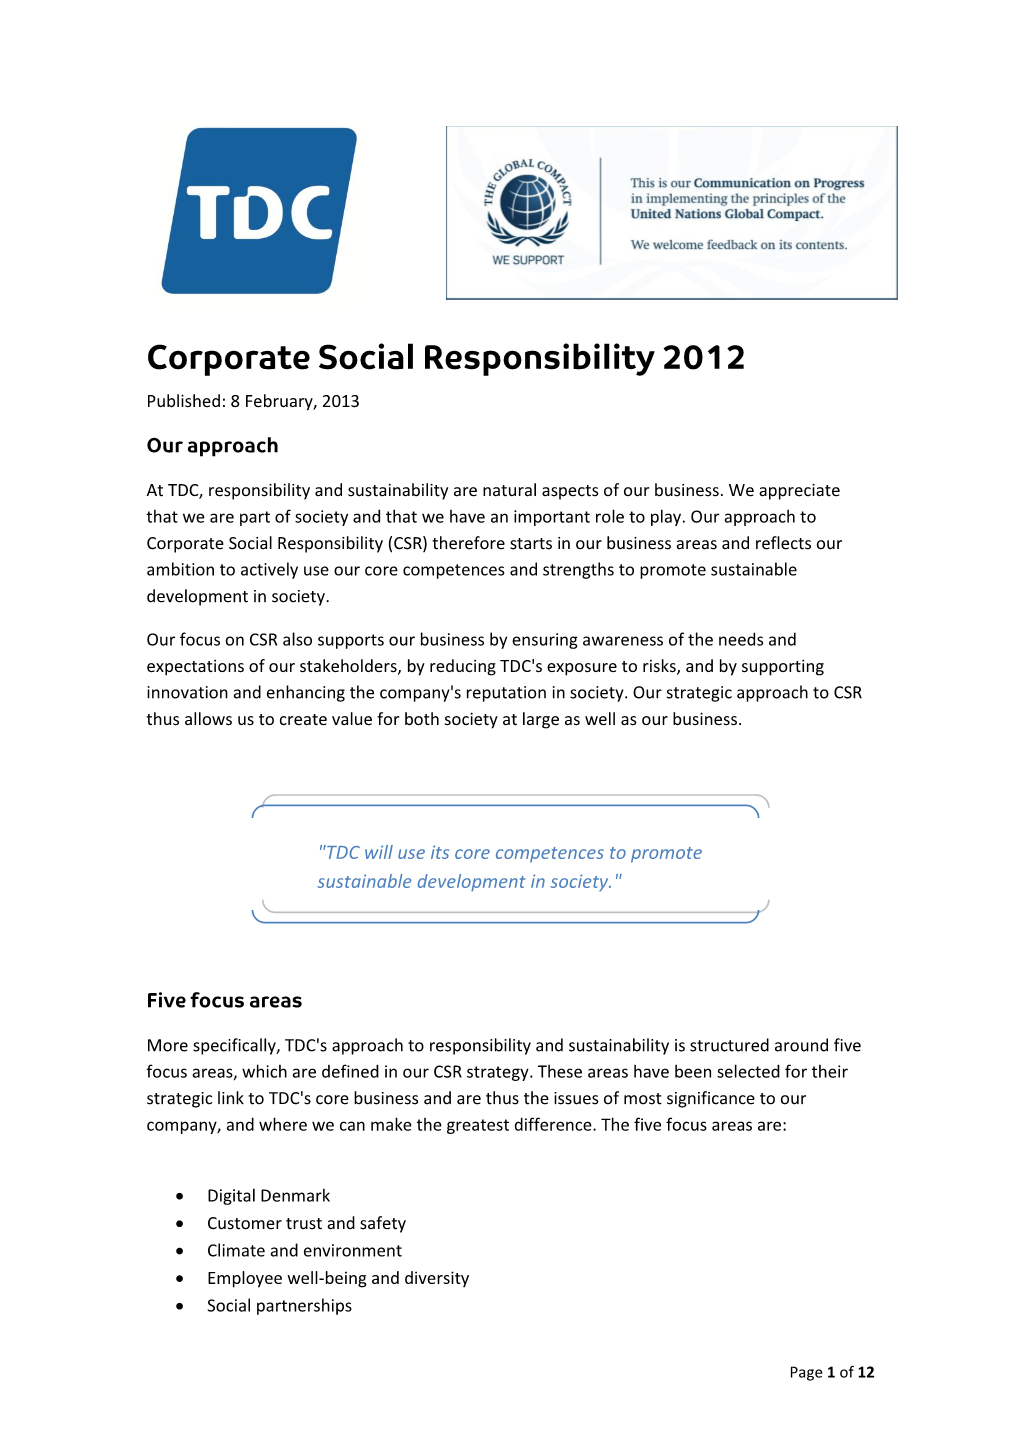 Corporate Social Responsibility 2012 Published: 8 February, 2013